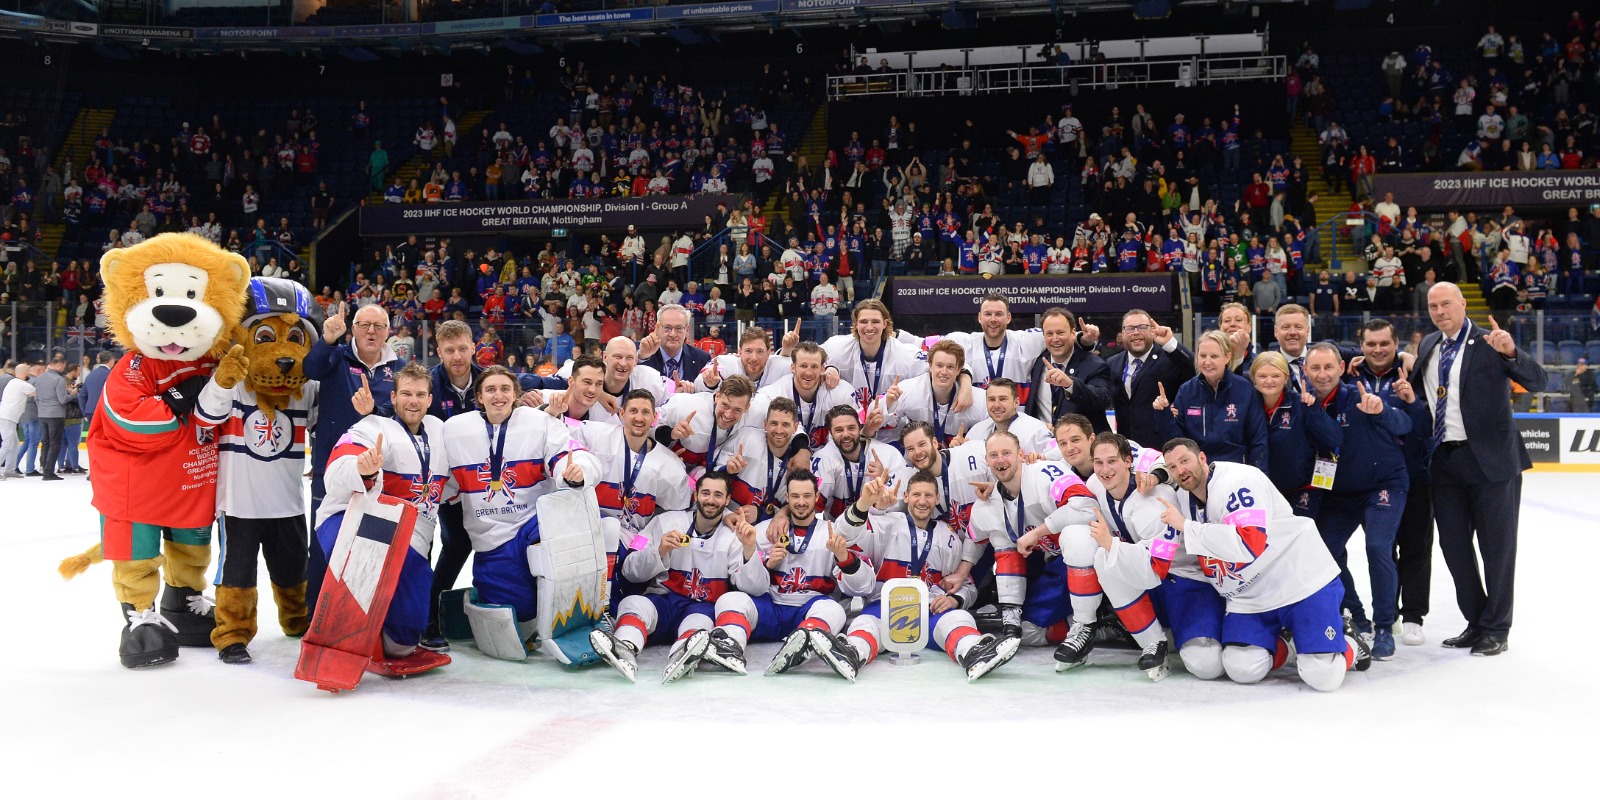 PROMOTION JOY FOR GREAT BRITAIN Top Image